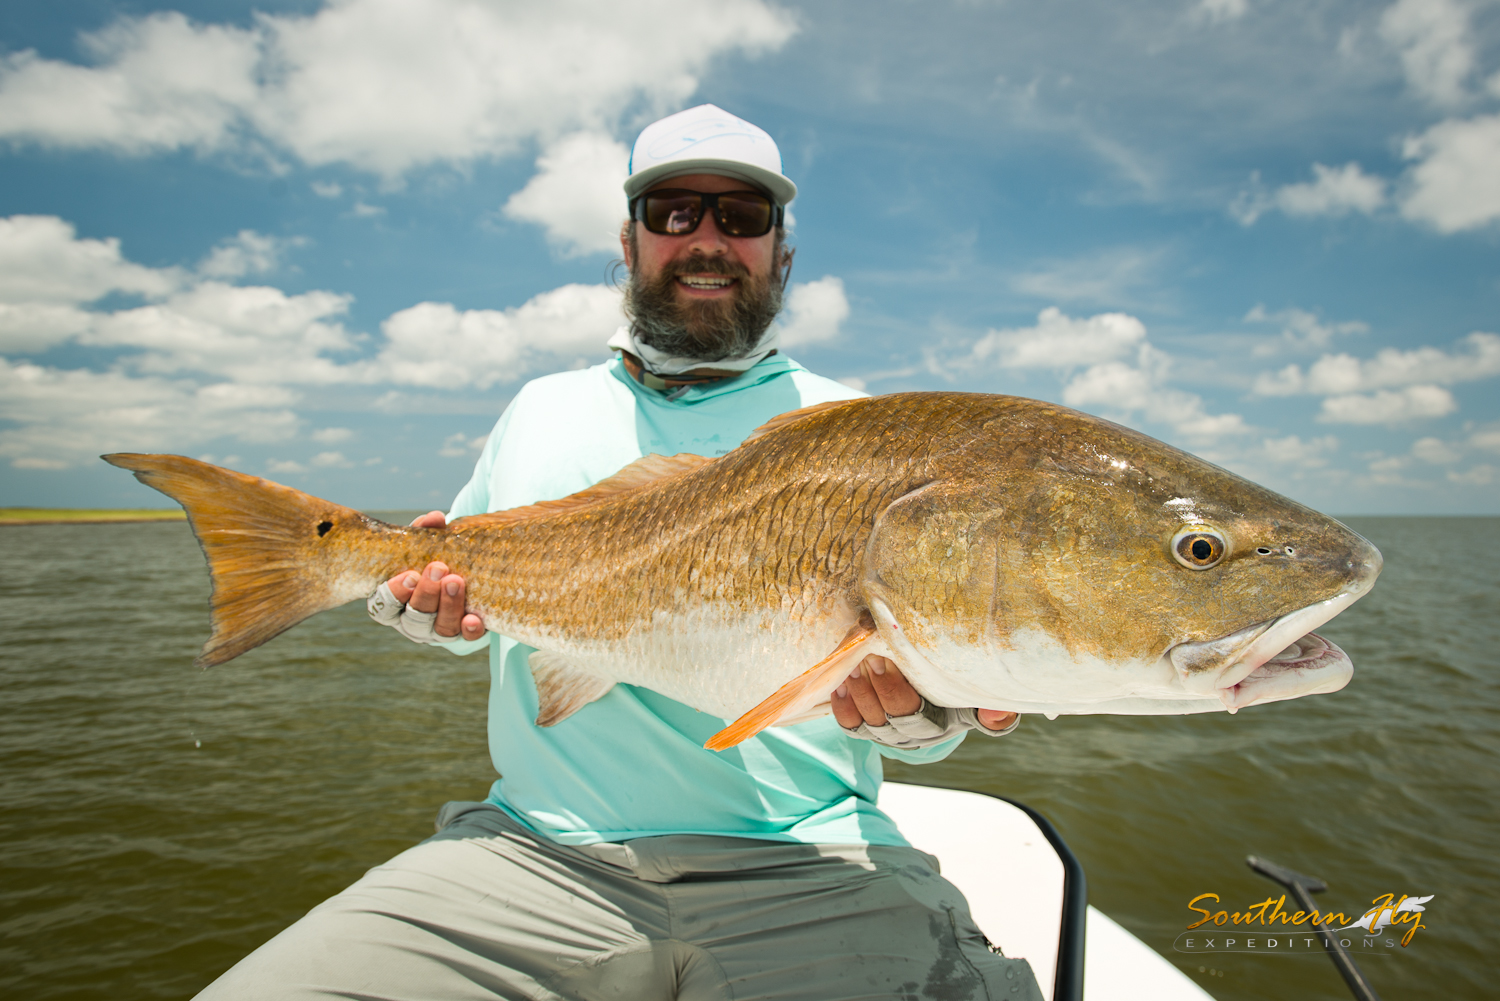 Salted Flats Fly Fishing New Orleans with Southern Fly Expeditions New Orleans Fishing 